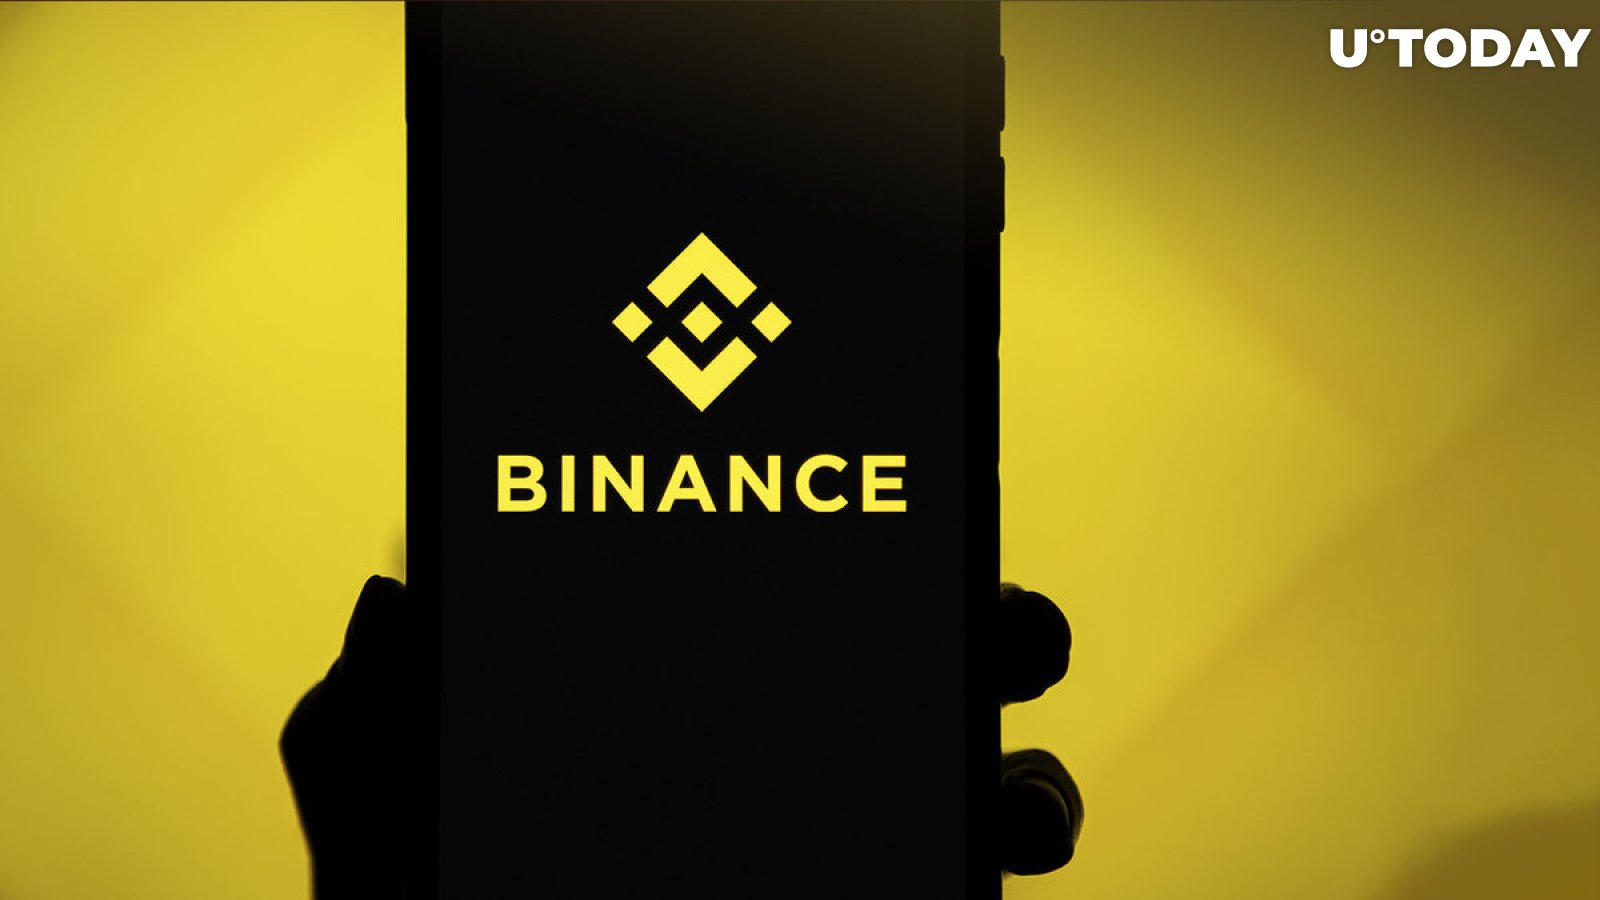 Binance's CZ Could Face Criminal Charges: WSJ